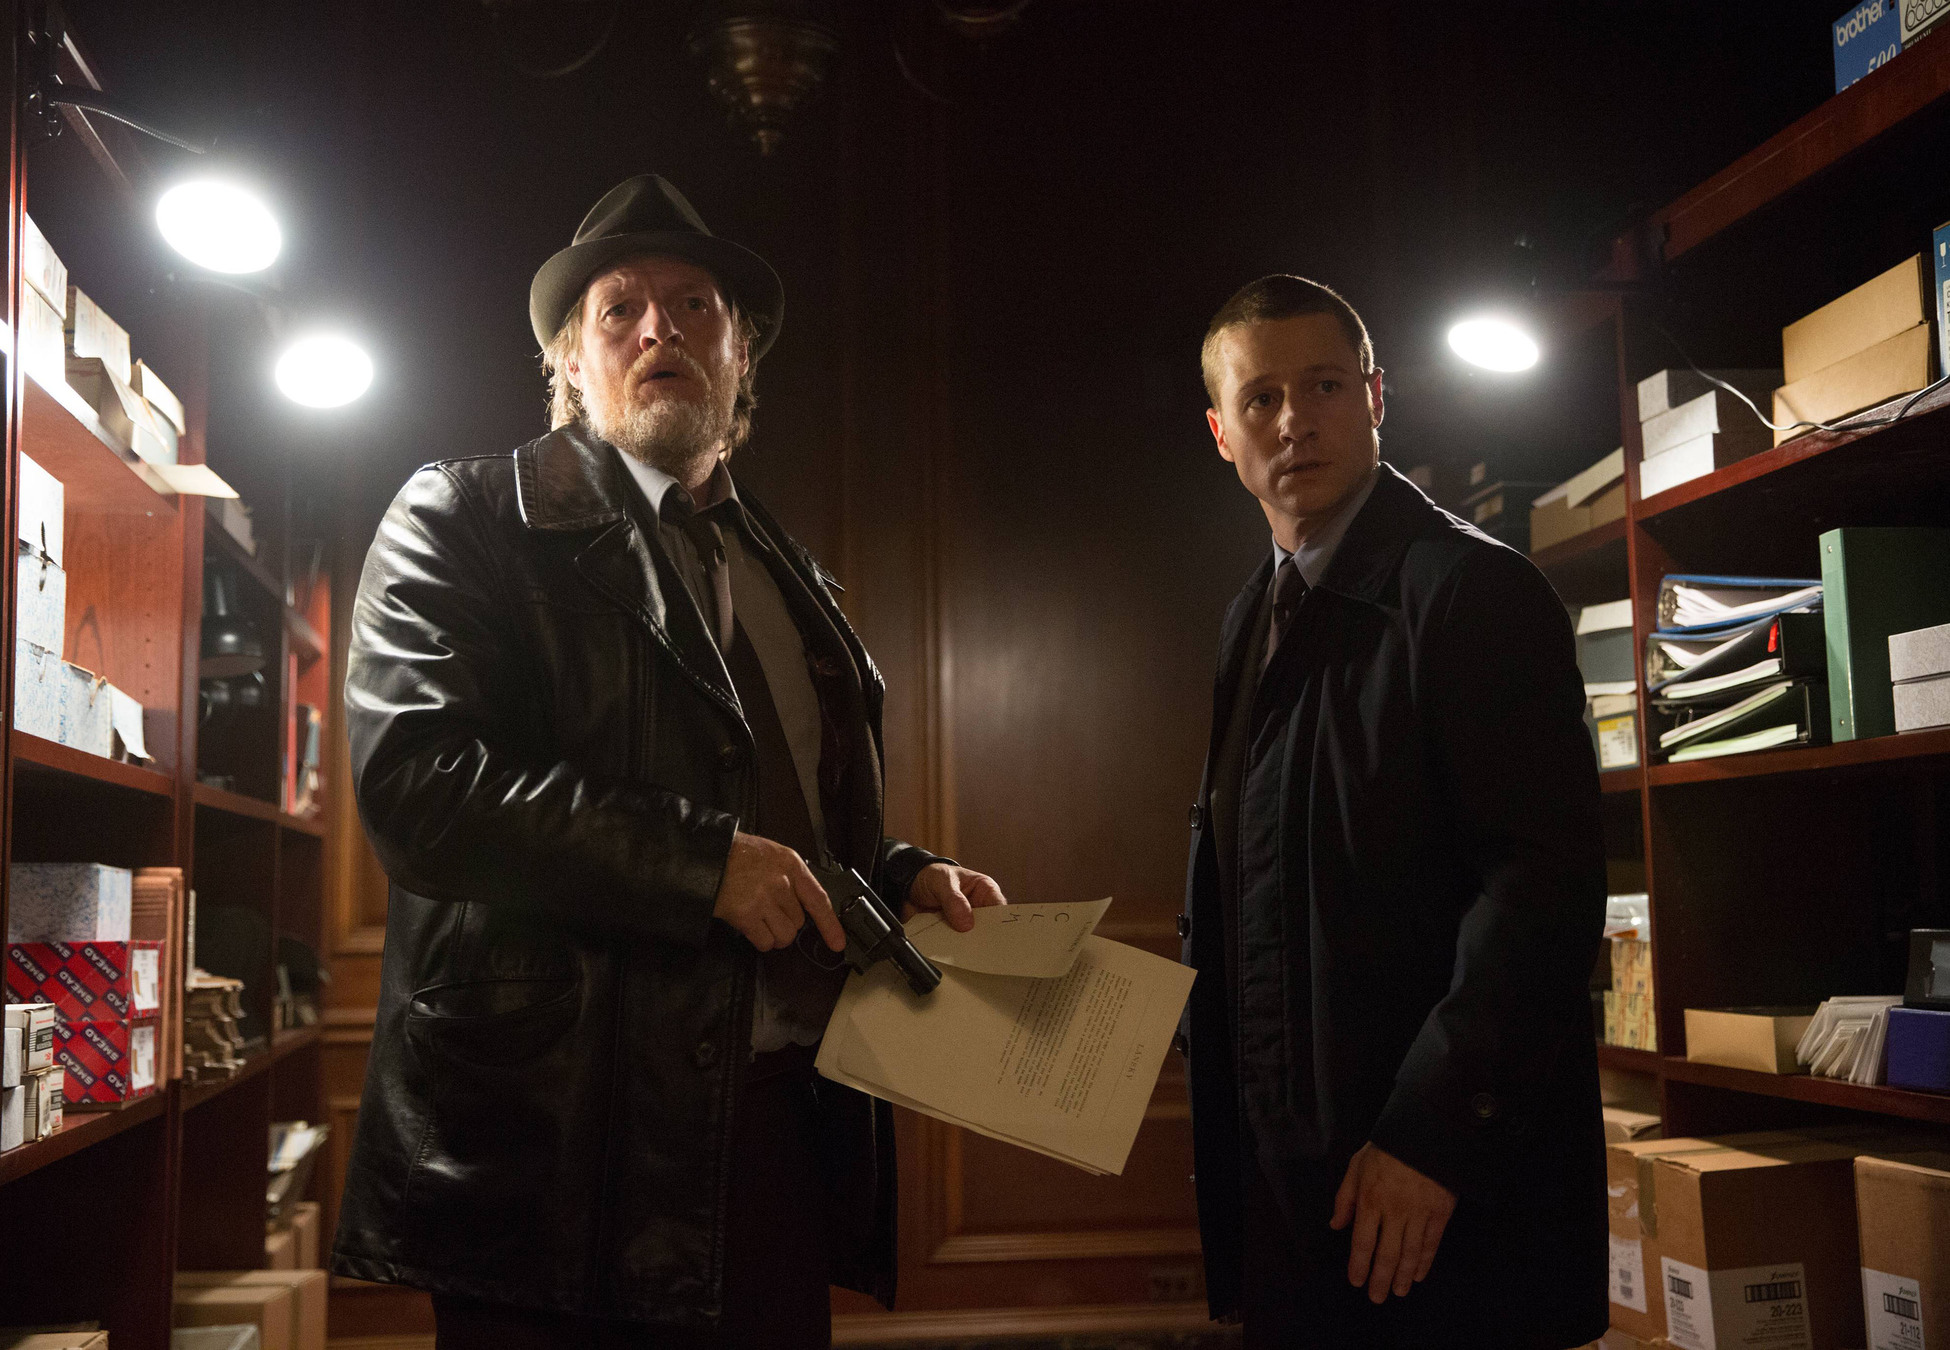 GOTHAM: Detectives Harvey Bullock (Donal Logue, L) and James Gordon (Ben McKenzie, R) find a piece of evidence in the "Arkham" episode of GOTHAM airing Monday, Oct. 13 (8:00-9:00 PM ET/PT) on FOX. Â©2014 Fox Broadcasting Co. Cr: Jessica Miglio/FOX